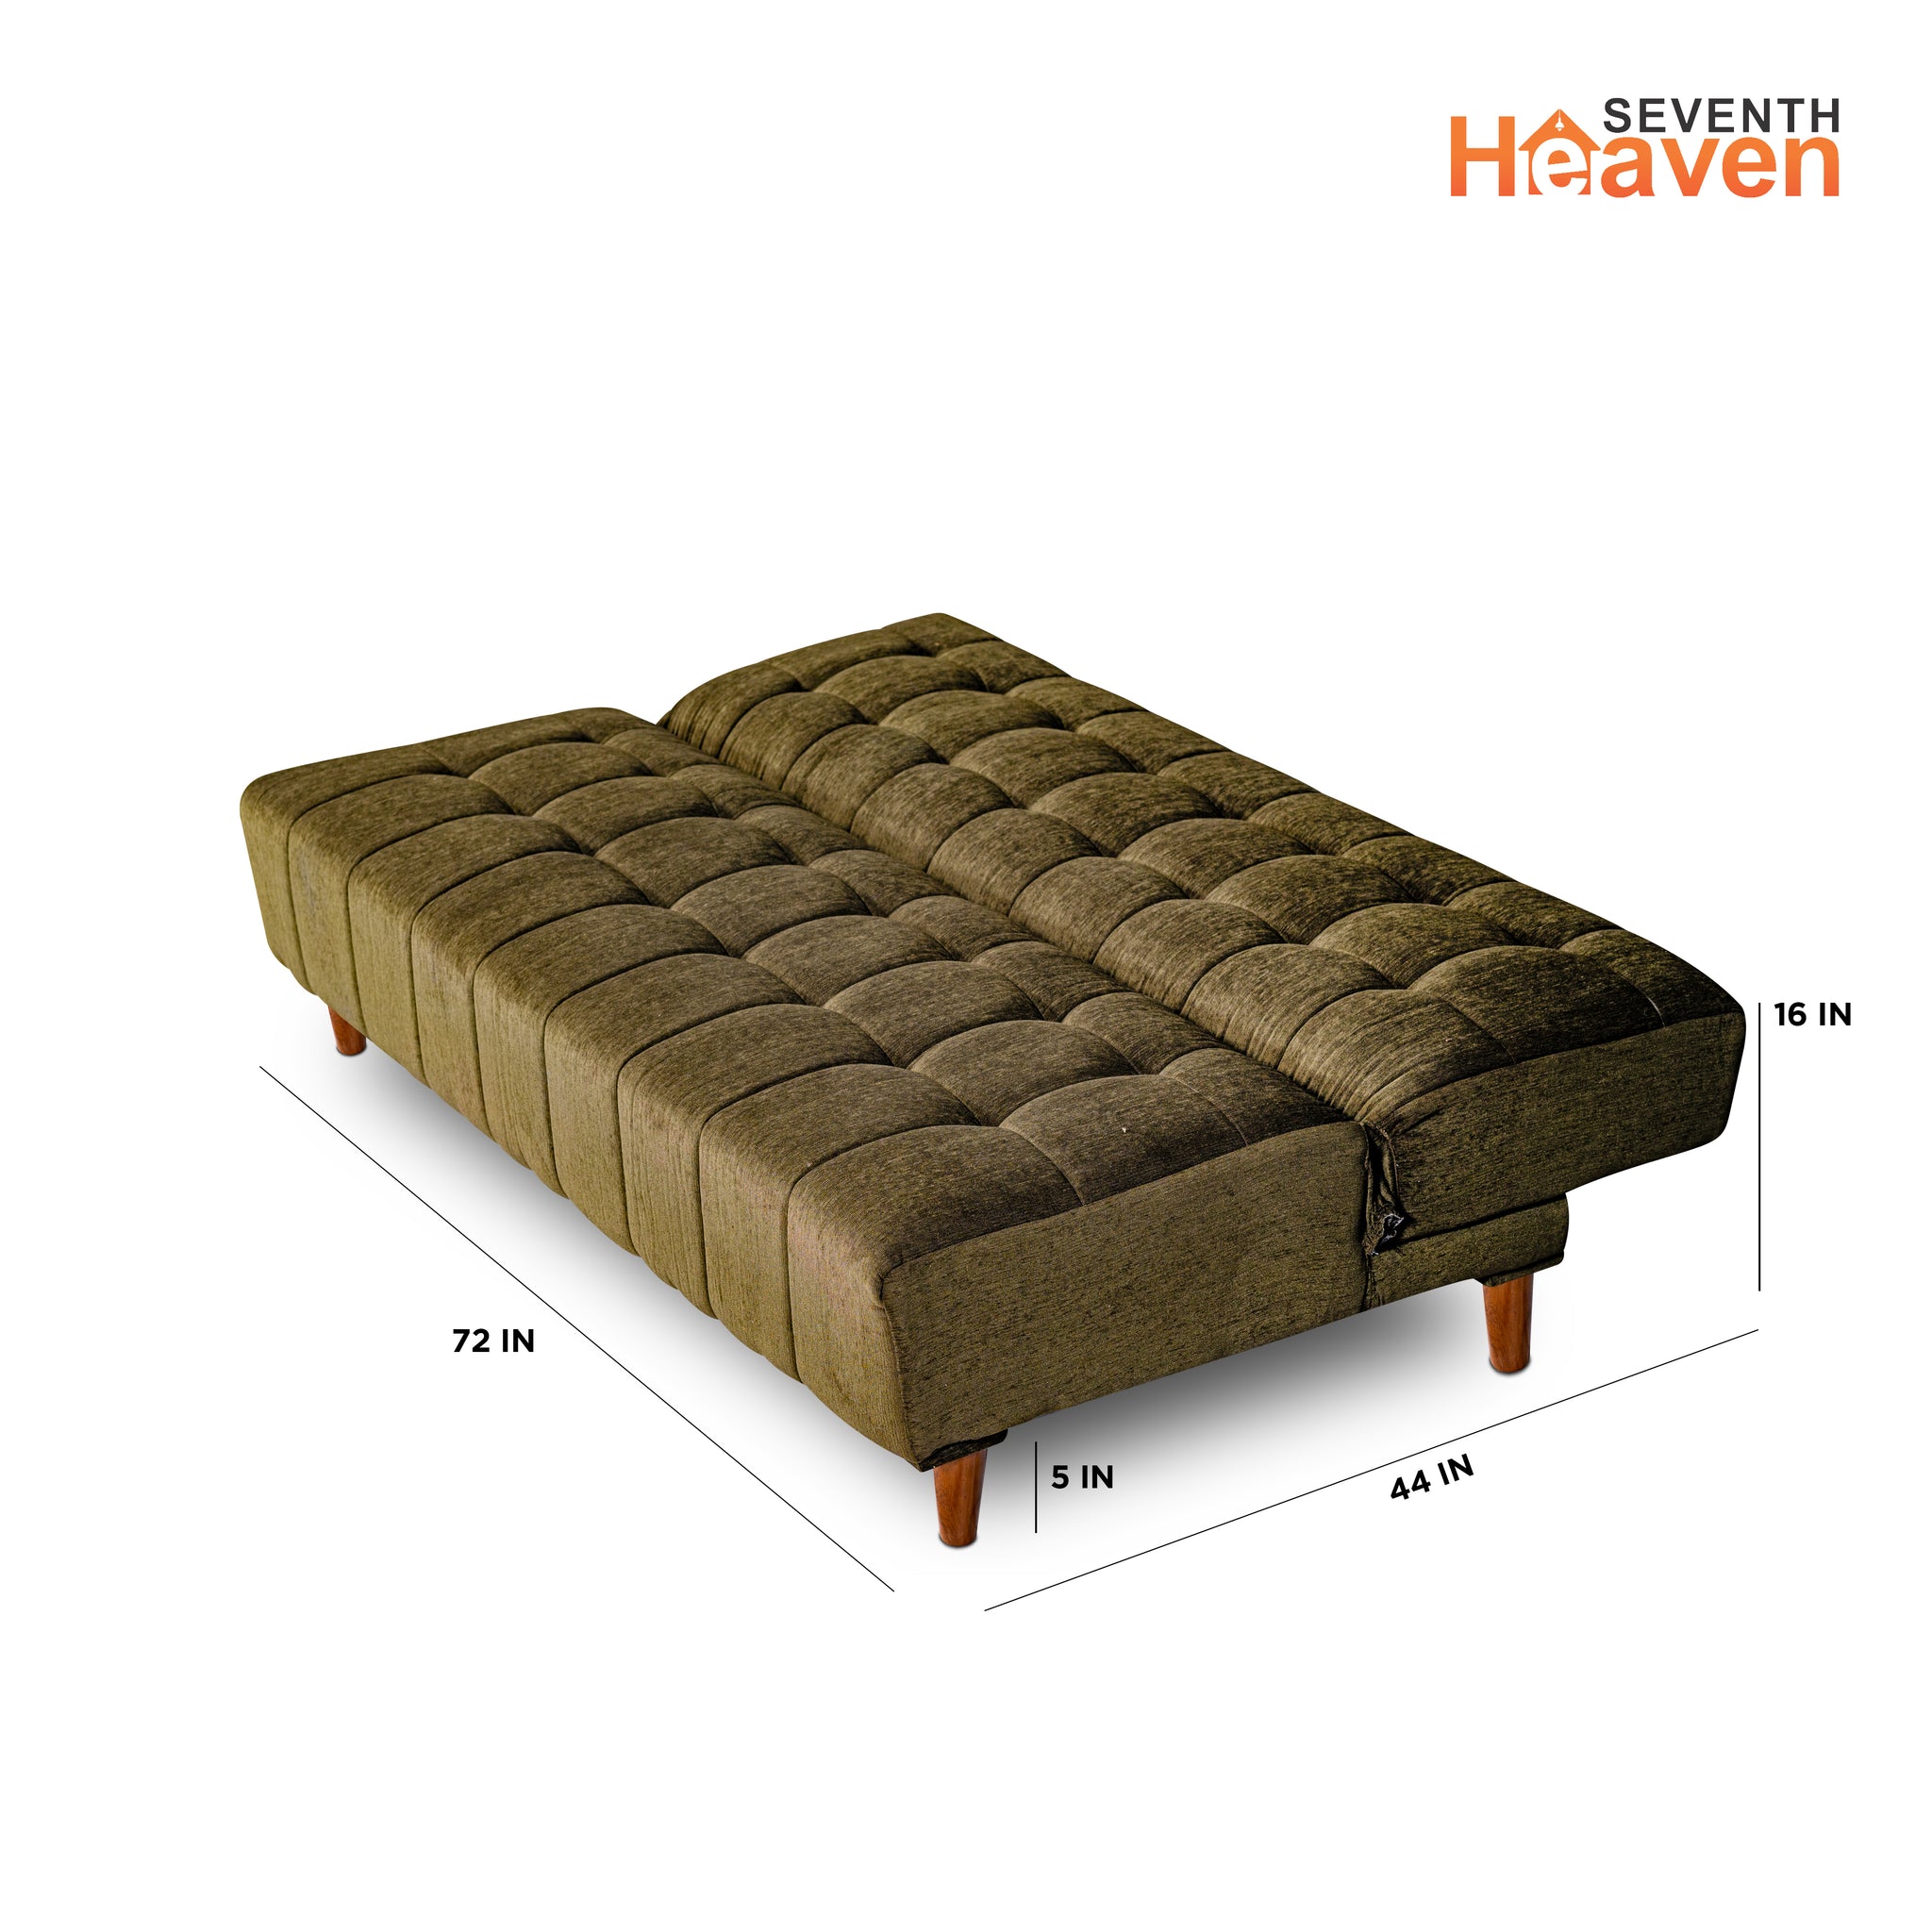 Seventh Heaven Florida 4 Seater Wooden Sofa Cum Bed. Modern & Elegant Smart Furniture Range for luxurious homes, living rooms and offices. Use as a sofa, lounger or bed. Perfect for guests. Molphino fabric with sheesham polished wooden legs. Green colour.